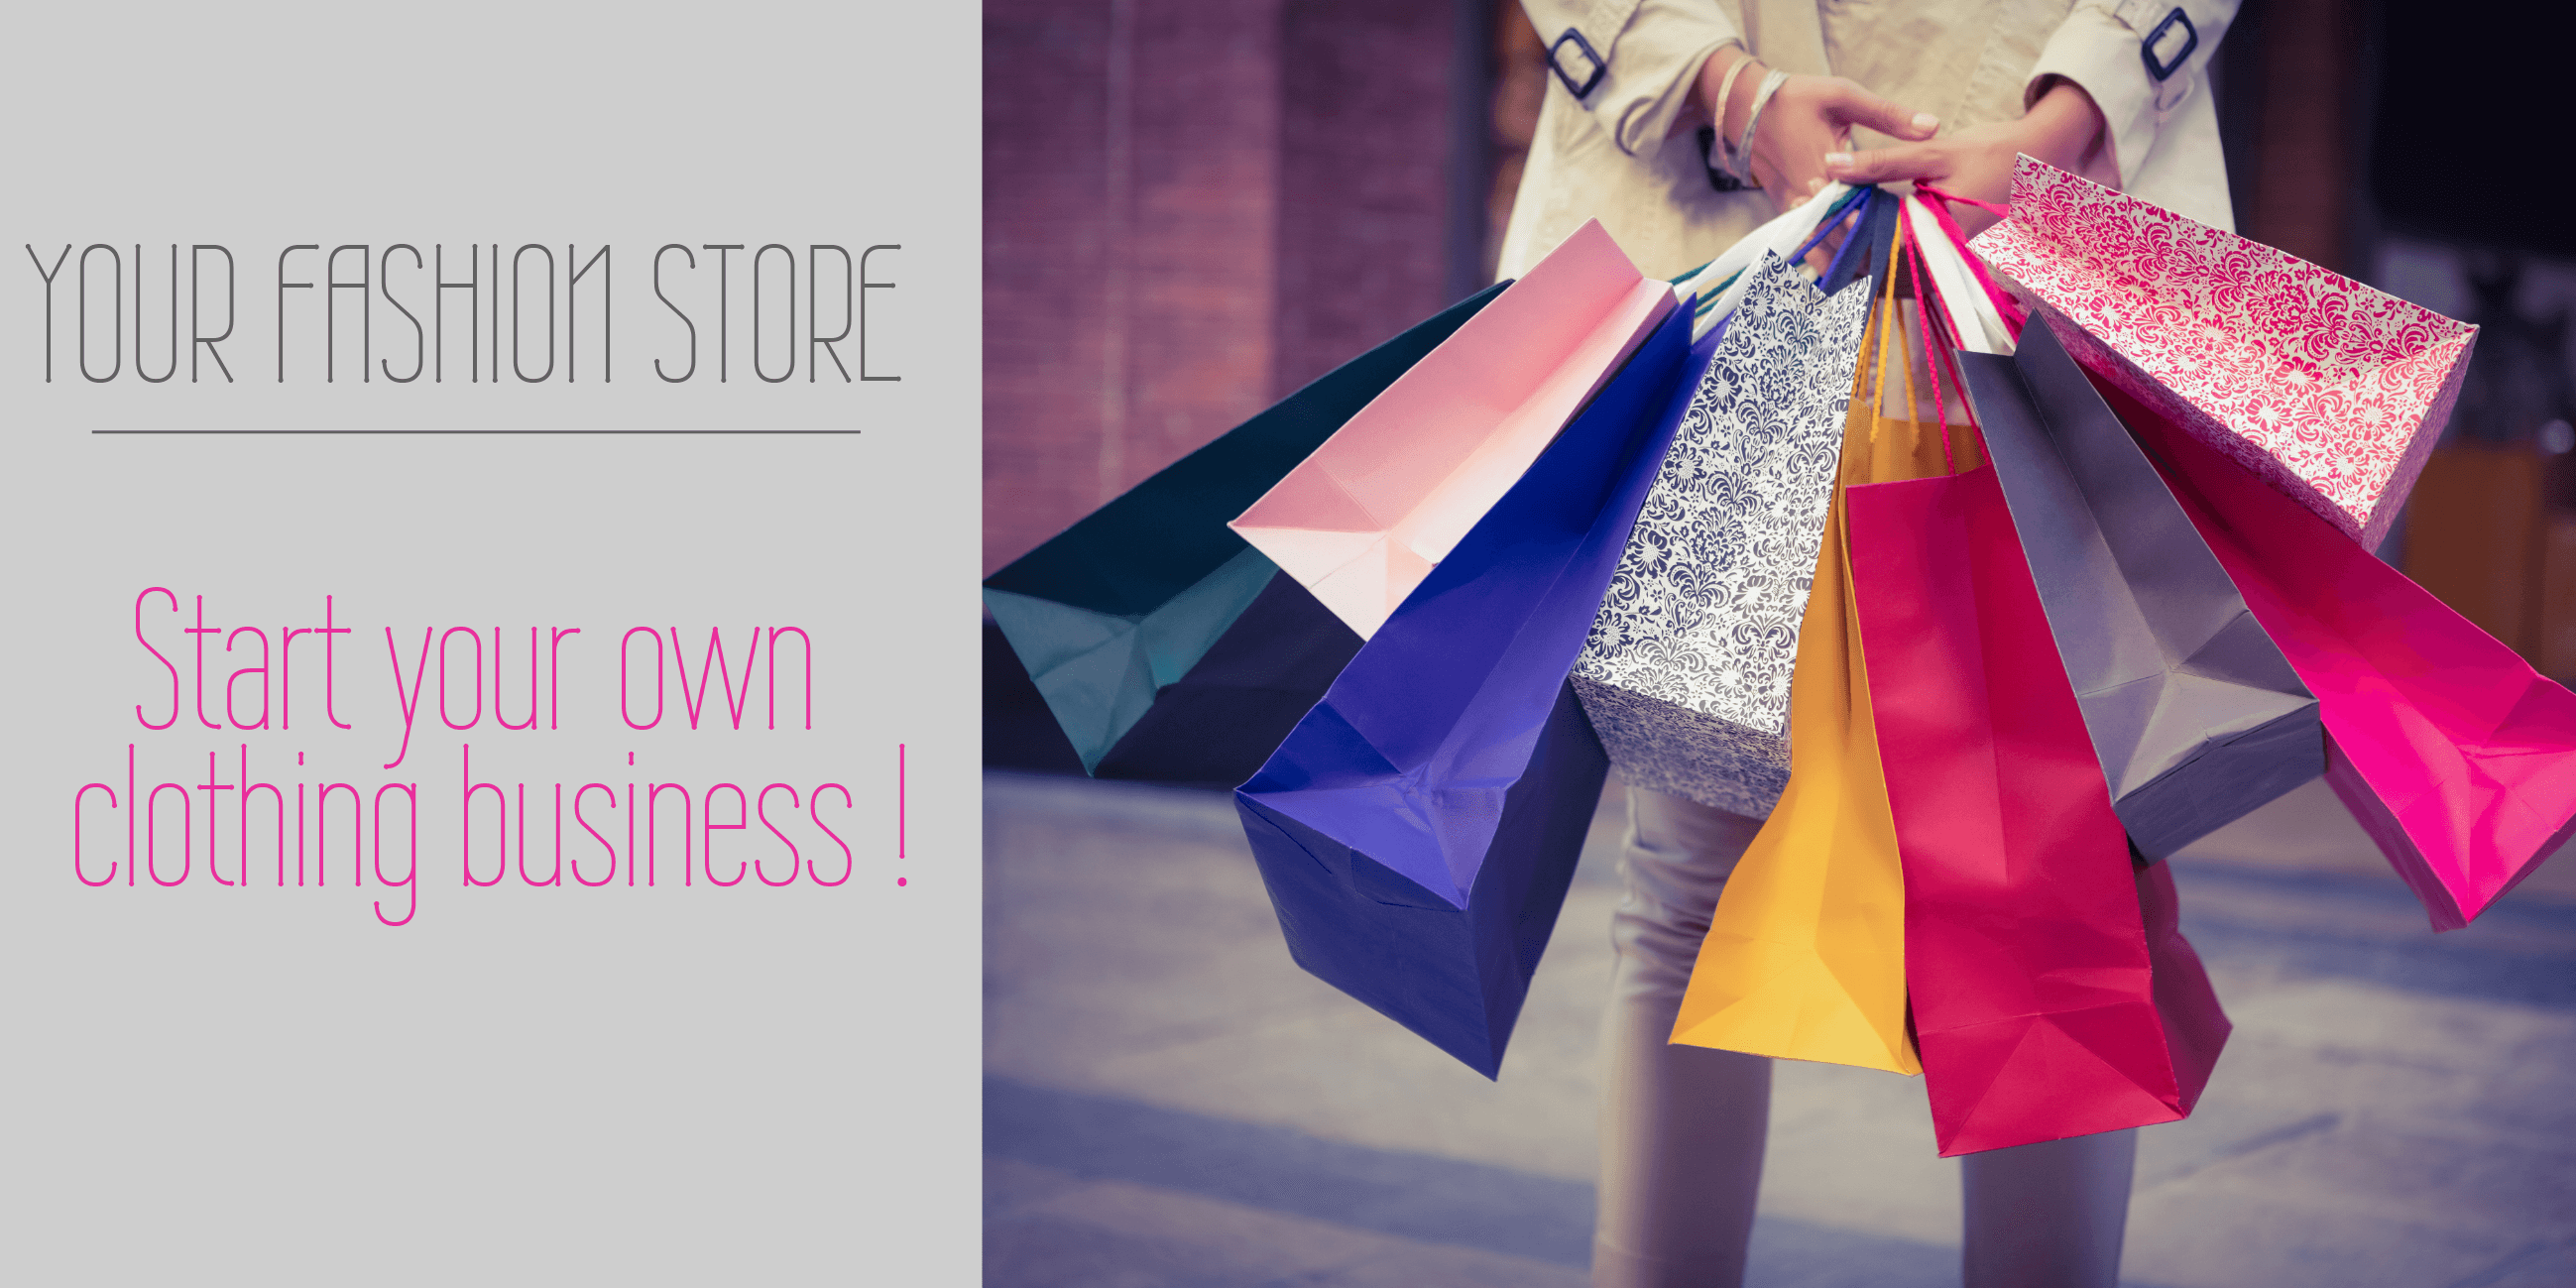 Text 'your fashion store start your own clothing business' with plenty of clothes bags - Top 10 Passive Income Side Hustles: New Ideas to Boost Your Earnings - Image